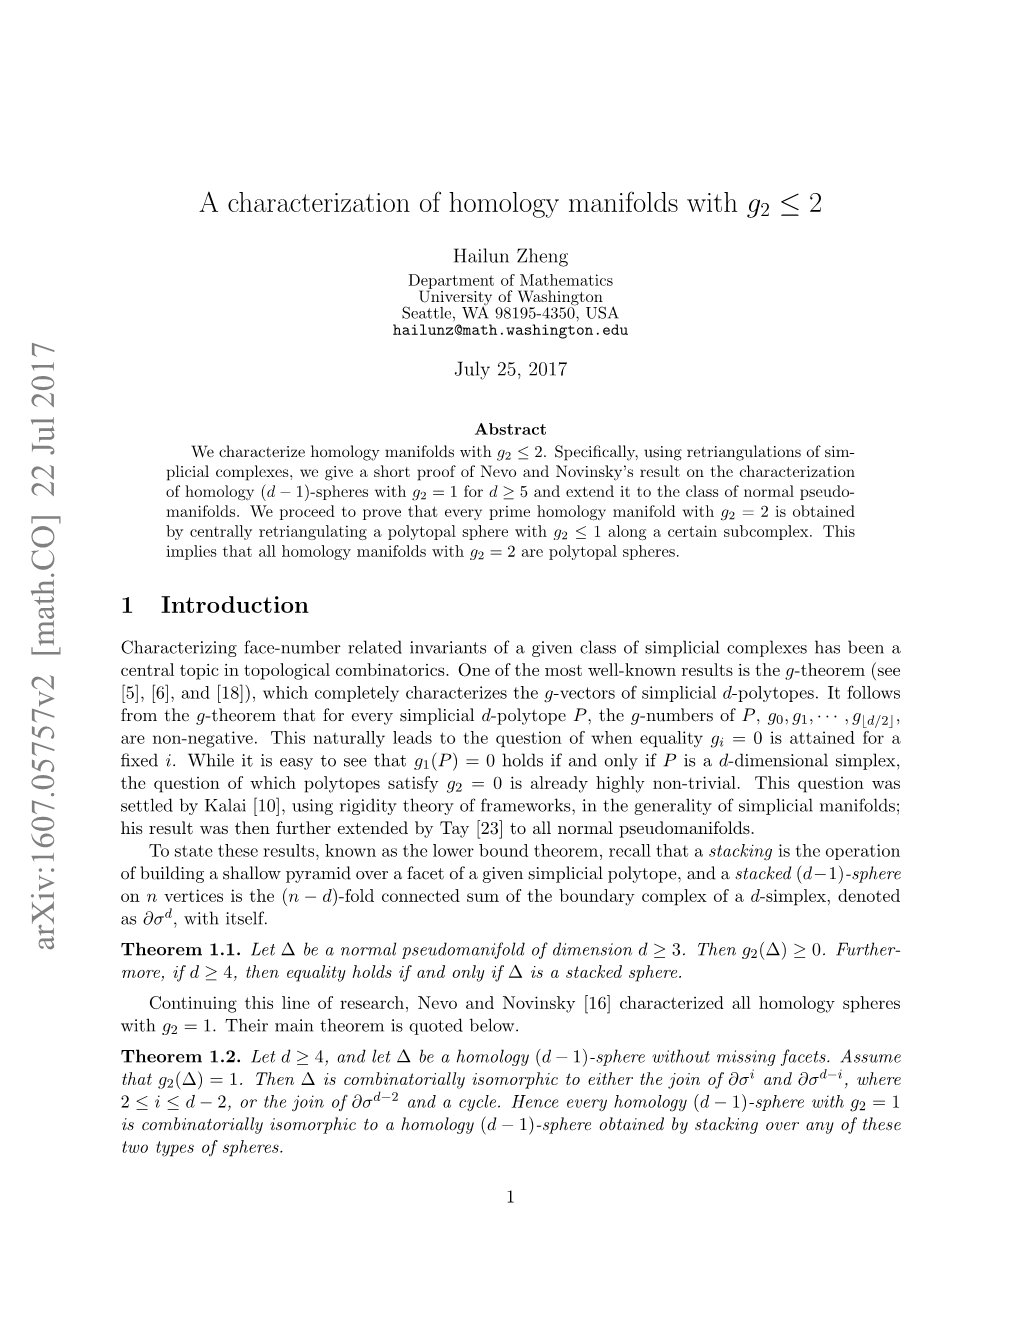 A Characterization of Homology Manifolds with $ G 2\Leq 2$